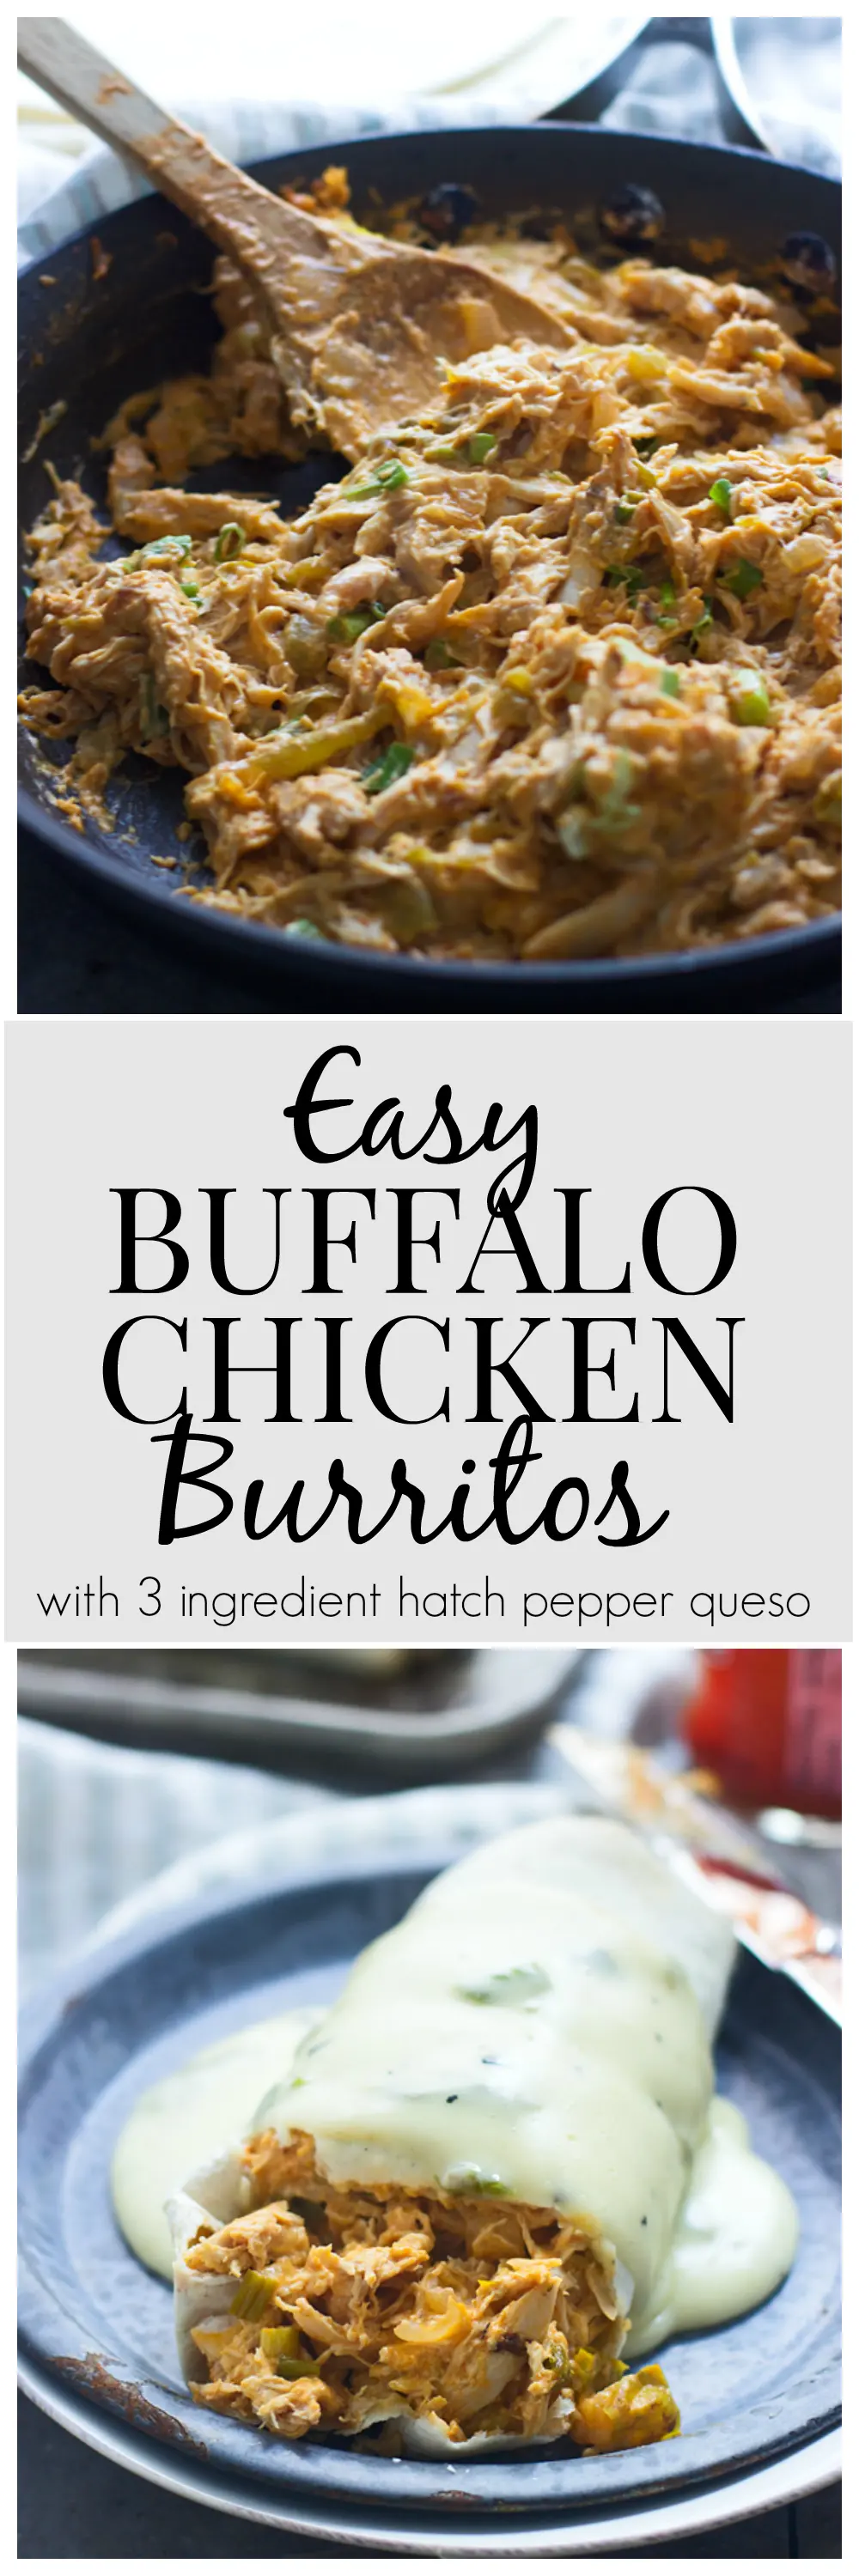 Easy Buffalo Chicken Burritos with Three Ingredient Hatch Pepper Queso